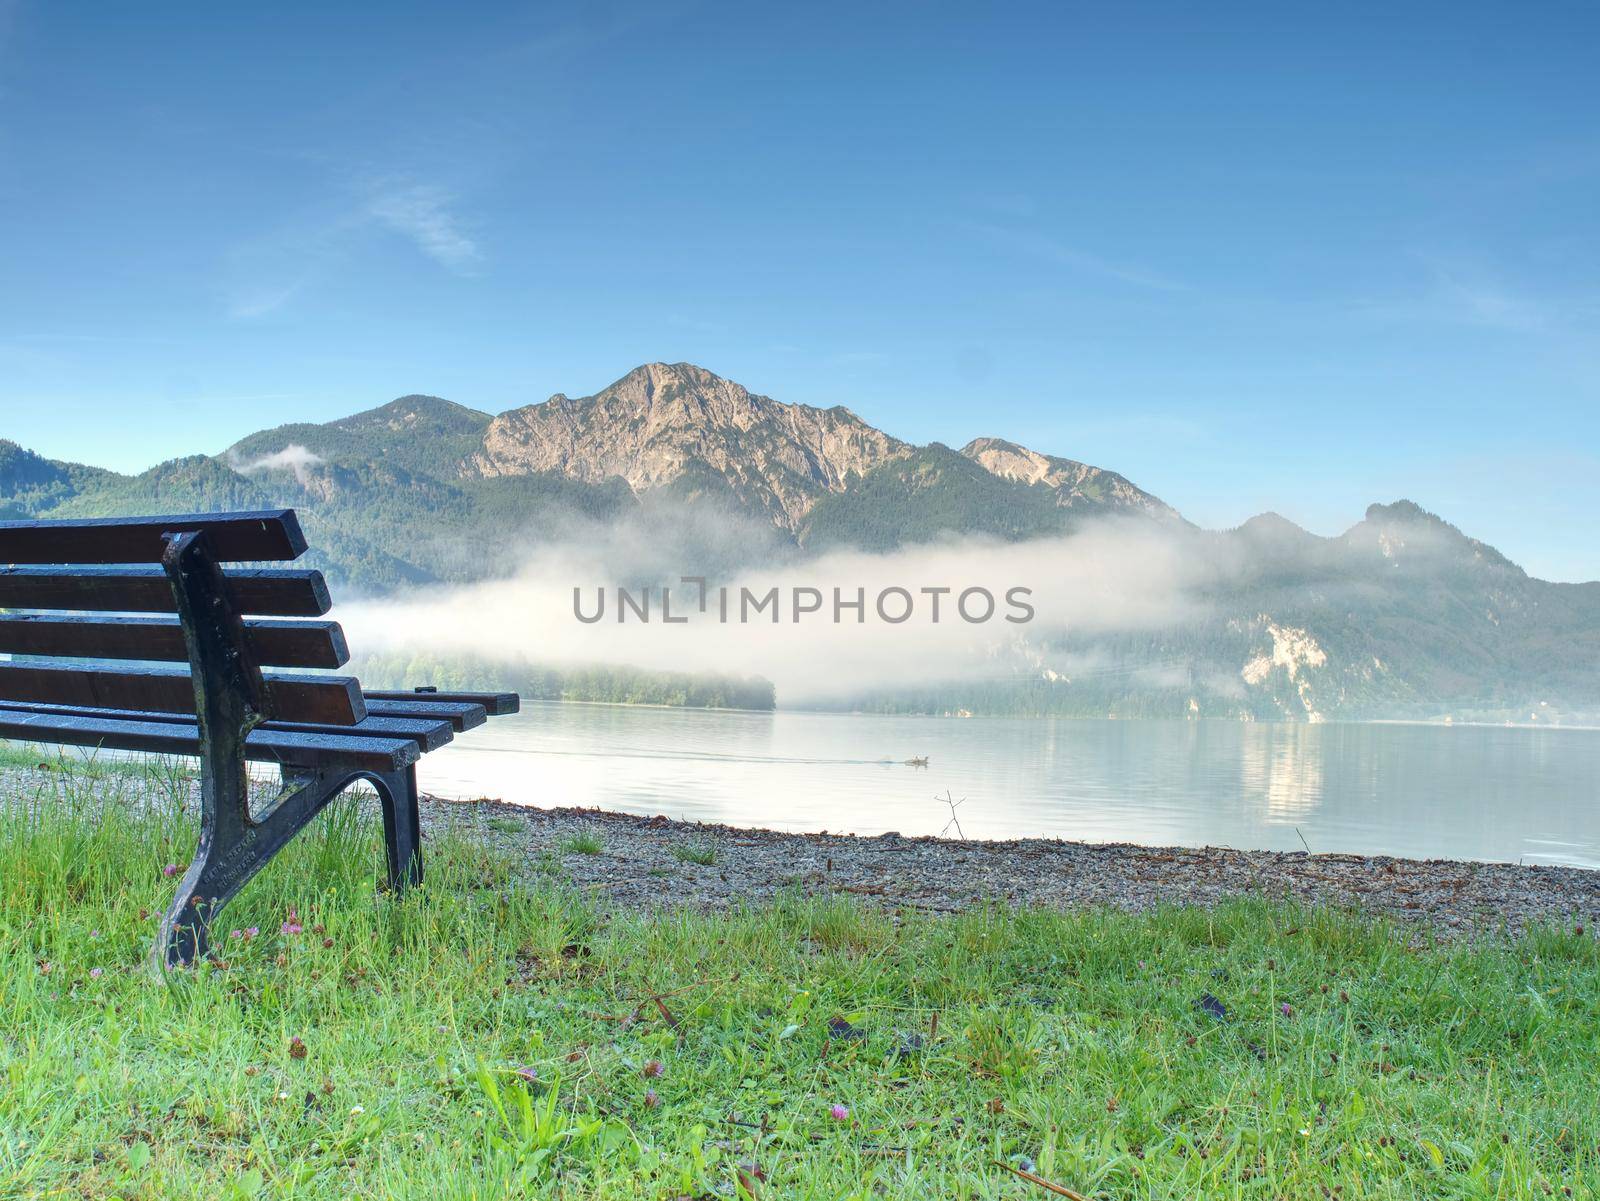 Lake landscape with a bench in the foreground ready to relax. by rdonar2